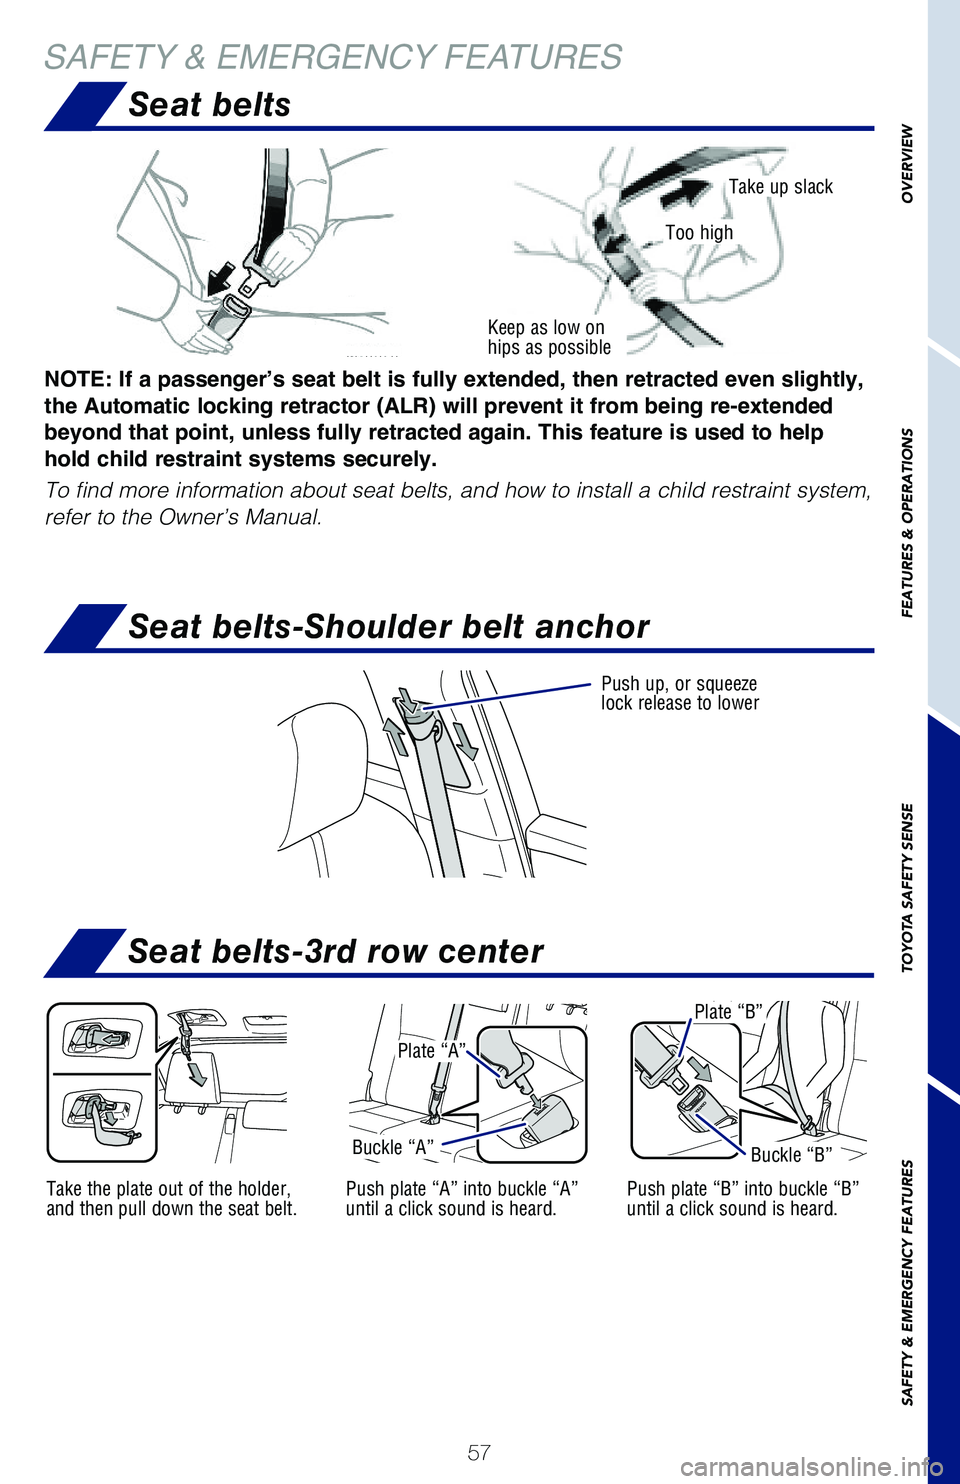 TOYOTA HIGHLANDER HYBRID 2021  Owners Manual (in English) 57
SAFETY & EMERGENCY FEATURESSeat belts
Seat belts-3rd row center
Seat belts-Shoulder belt anchor
Take the plate out of the holder, 
and then pull down the seat belt.Push plate “A” into buckle �